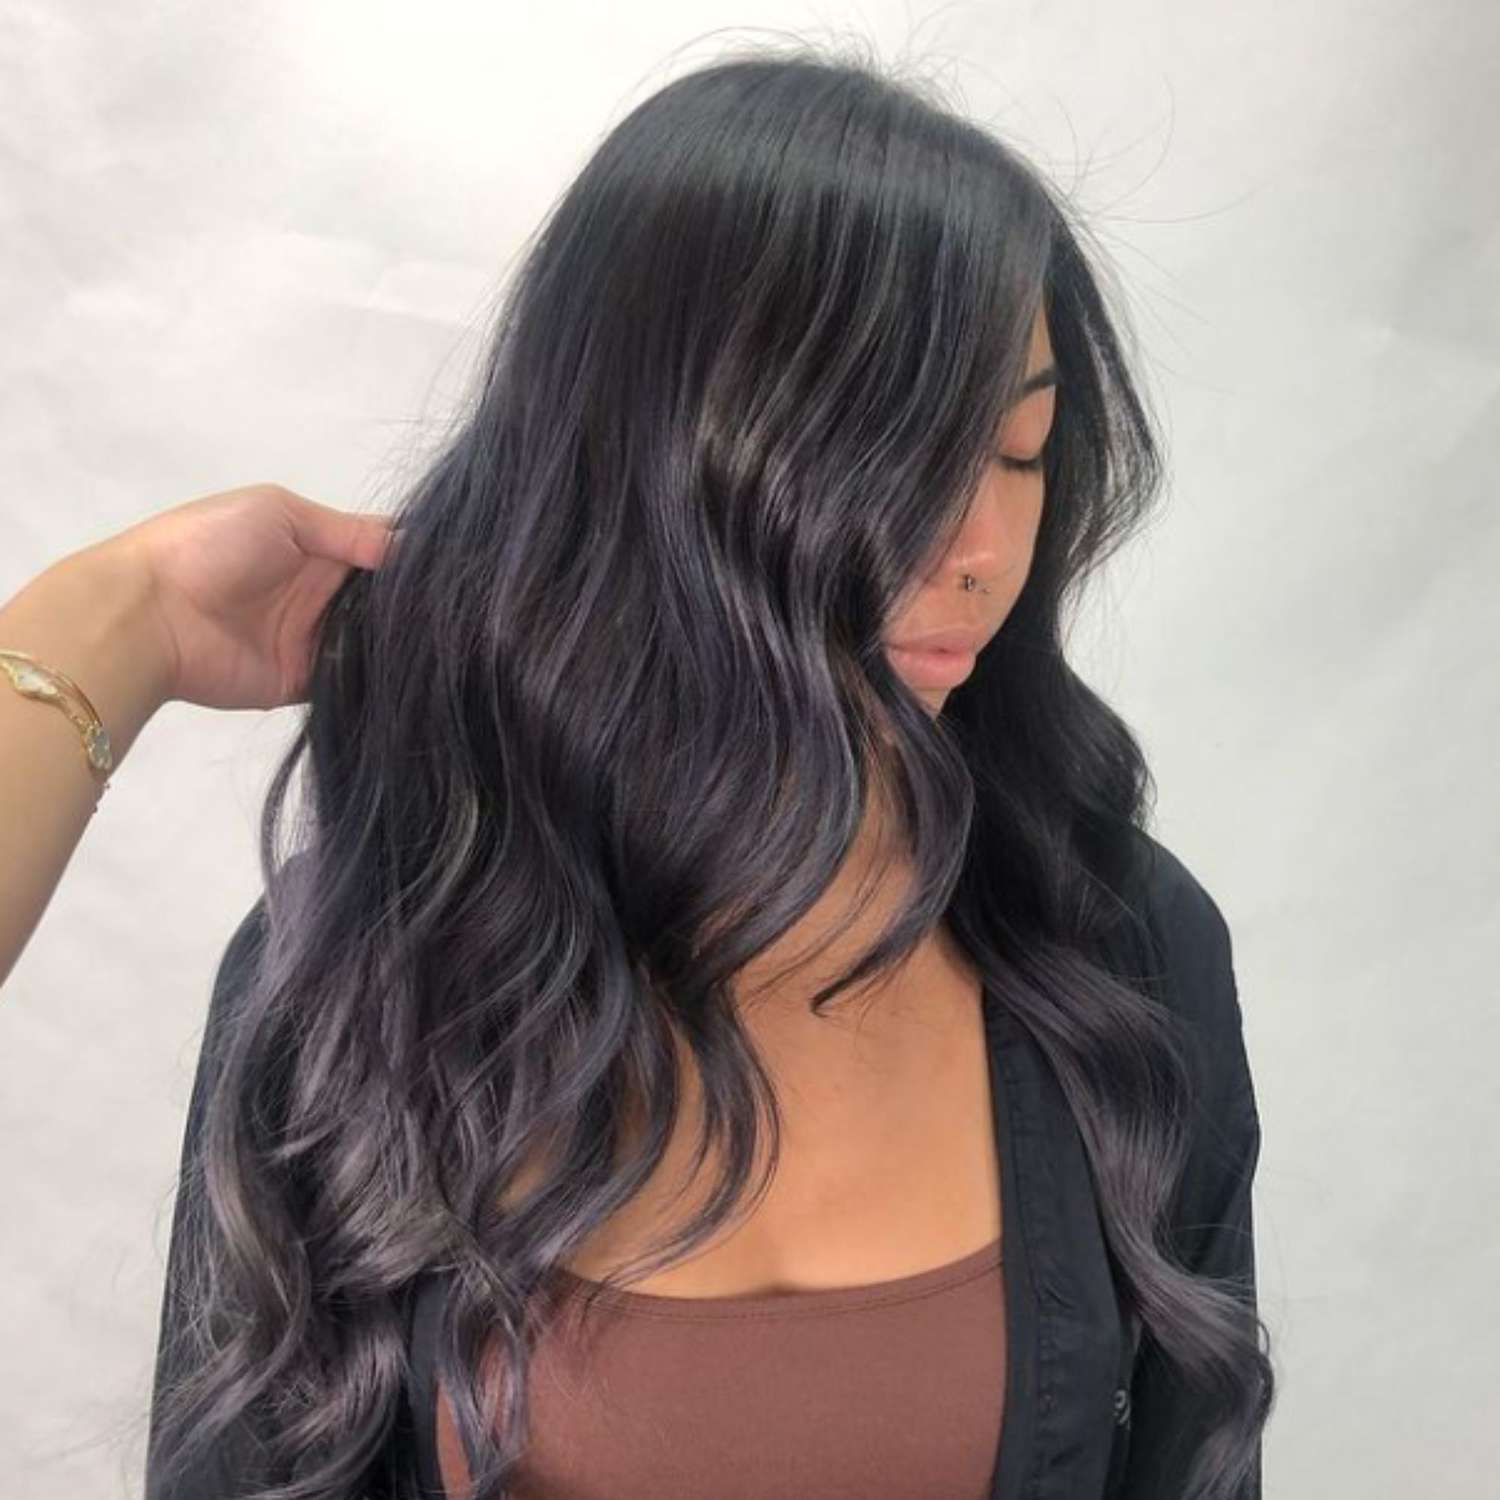 Almost-gray blue-black hair in loose waves, viewed from a slight angle